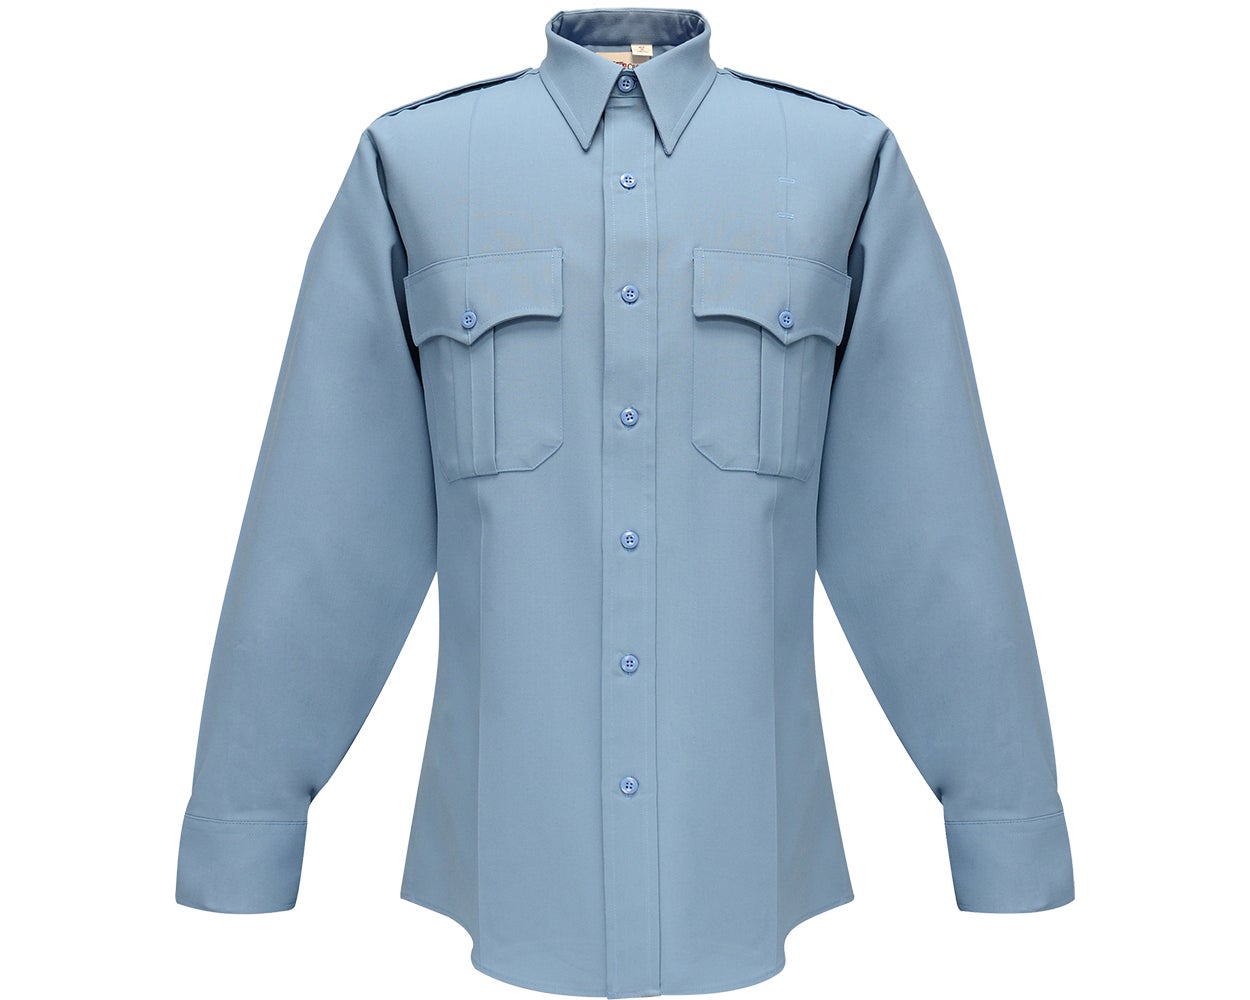 Flying Cross Deluxe Tropical 65% Poly/35% Rayon Long Sleeve Uniform Shirt with Pleated Pockets 45W66 - Medium Blue, 14-14.5 x 34-35